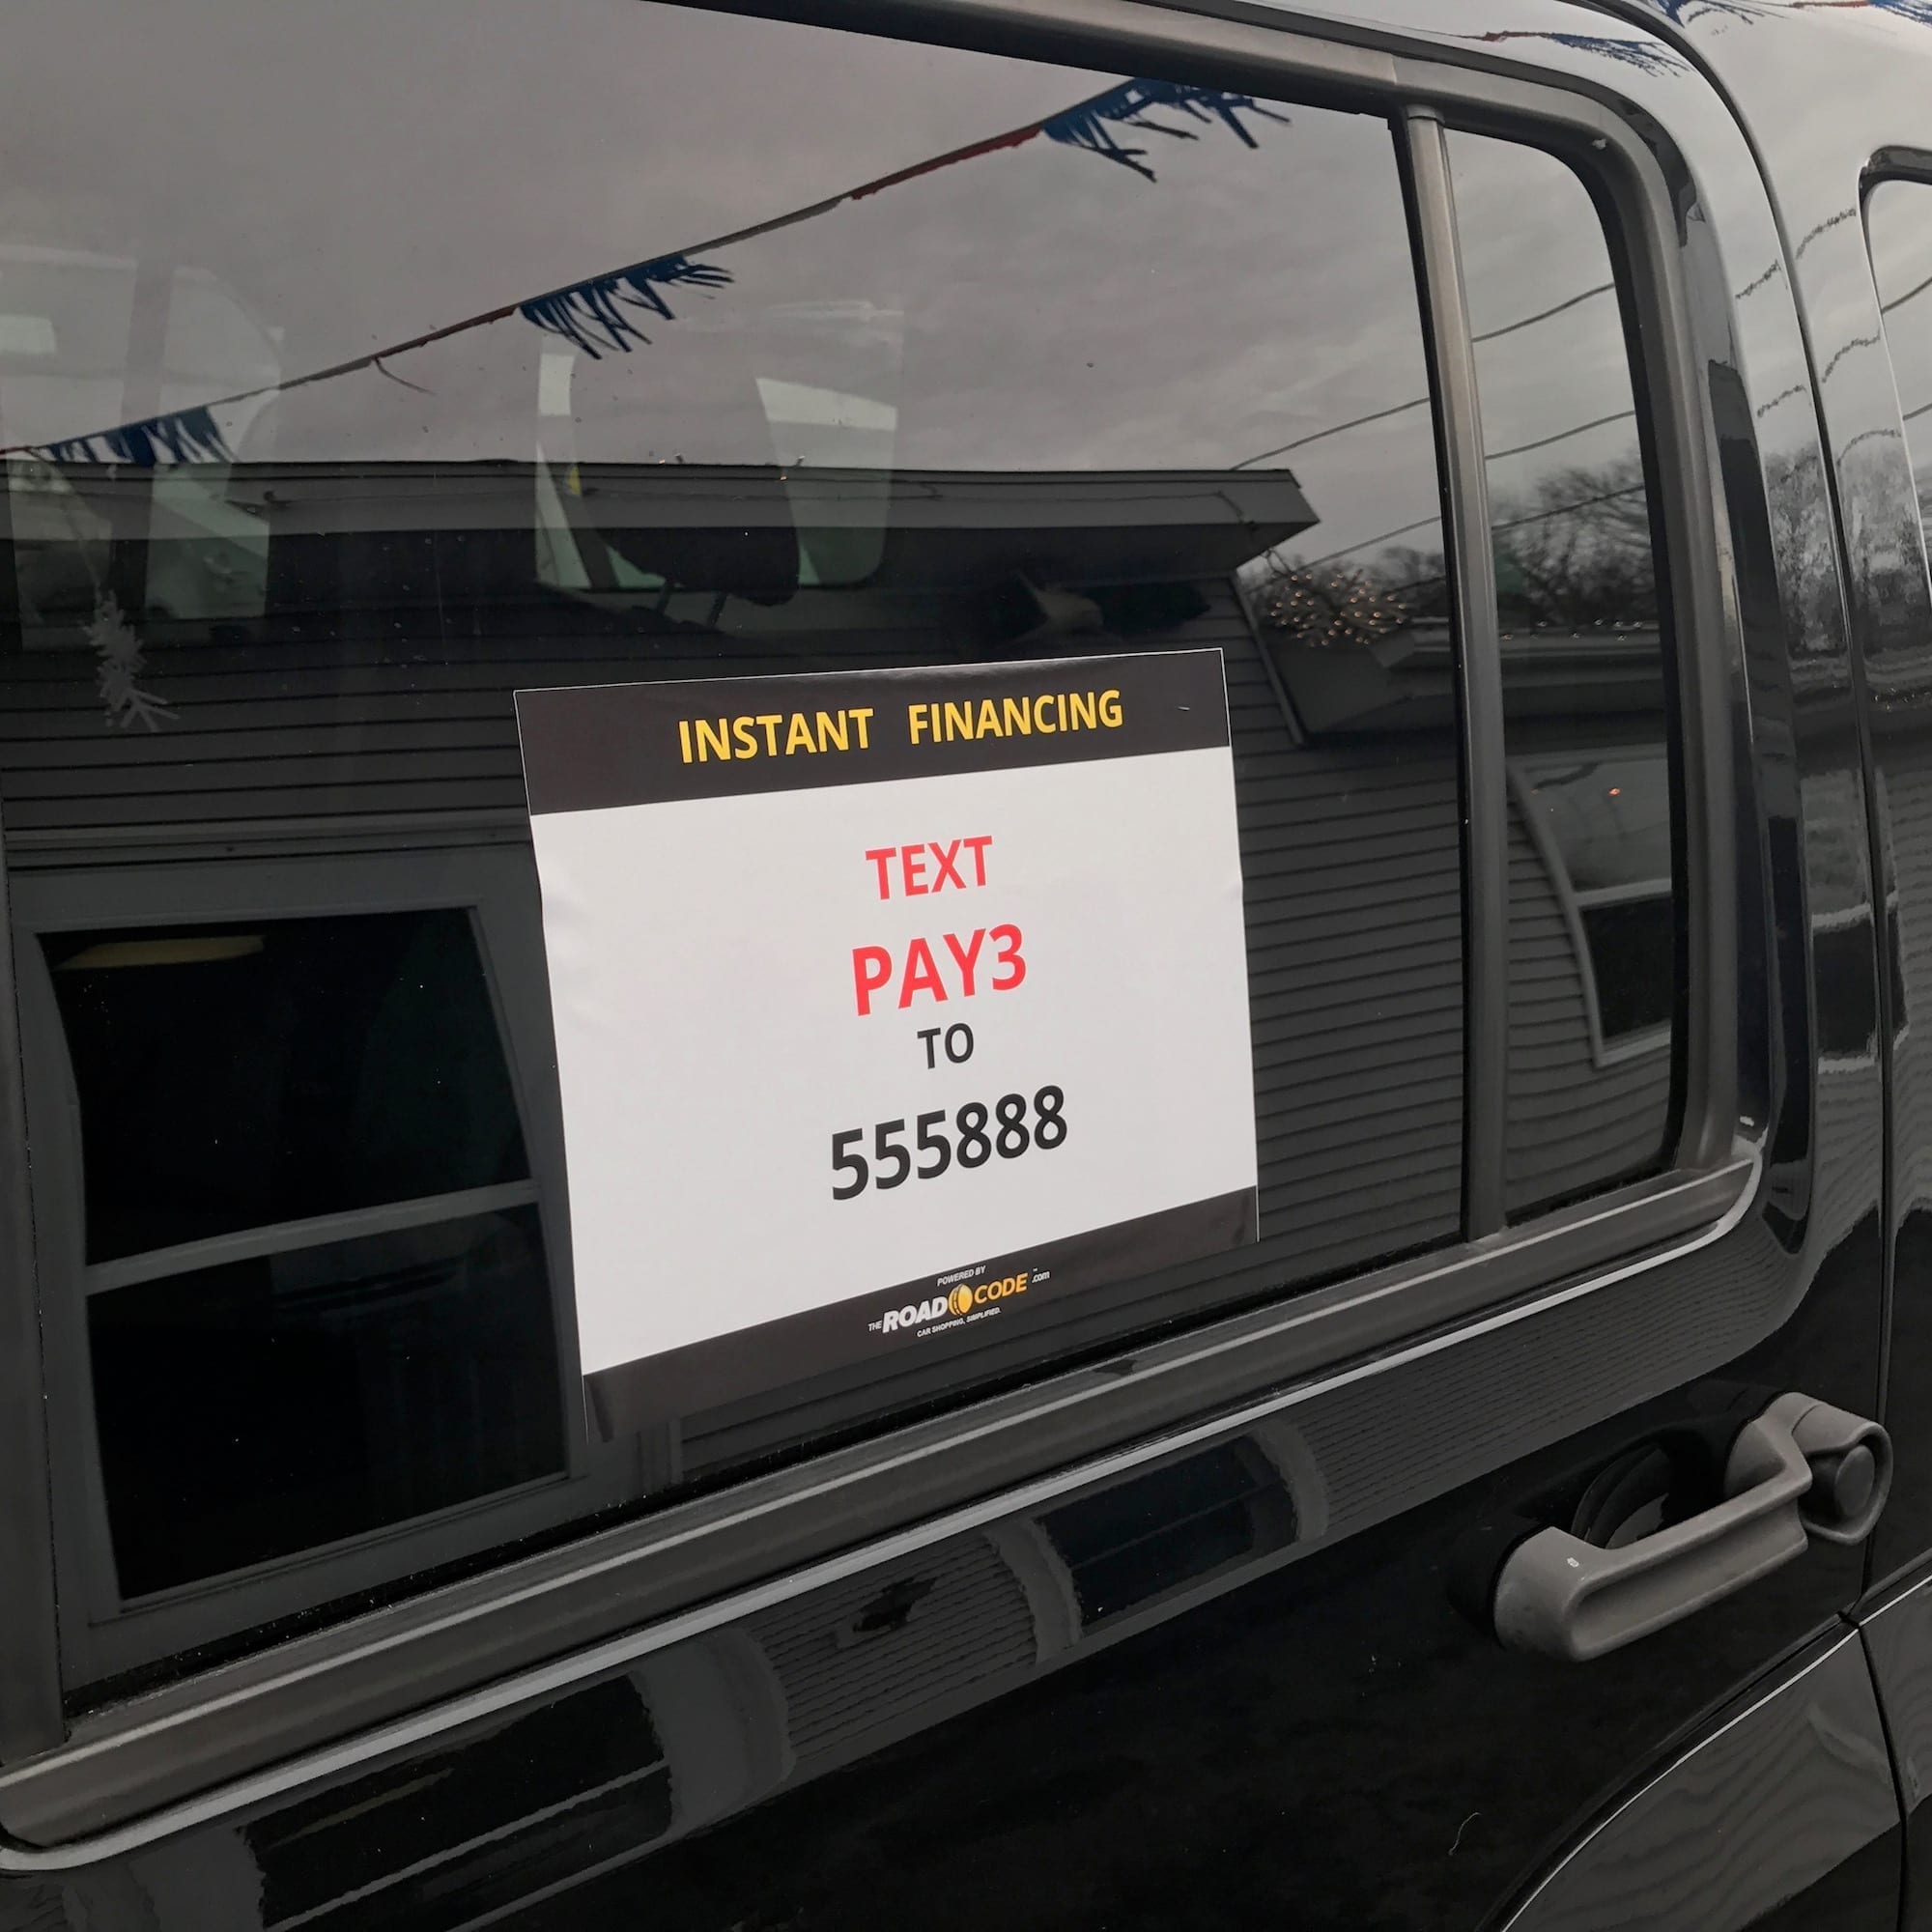 Sign in window of black vehicle, Instant Financing, Text PAY3 to 555888